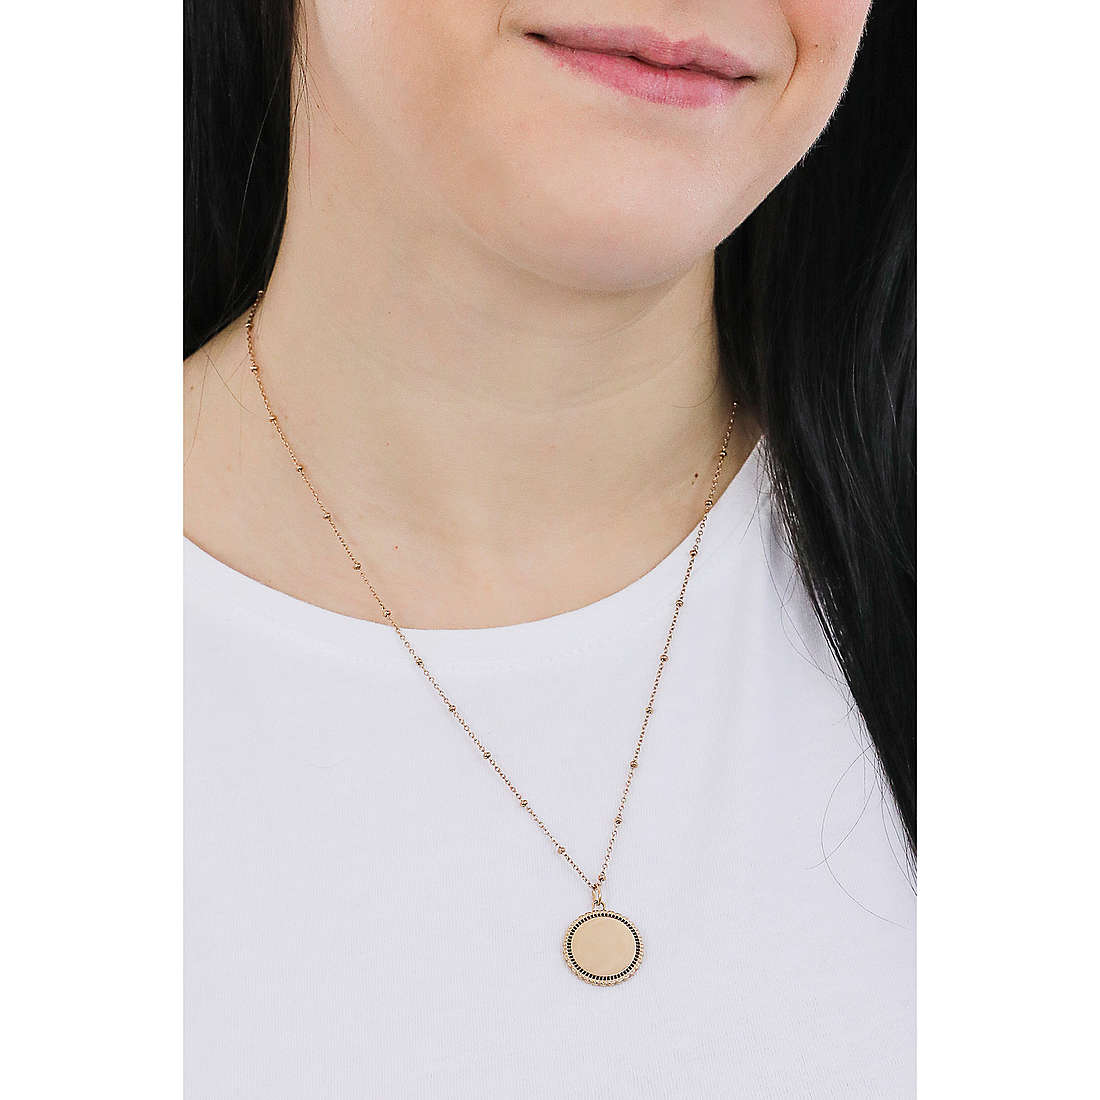 Fossil necklaces Vintage Iconic woman JF03332791 wearing